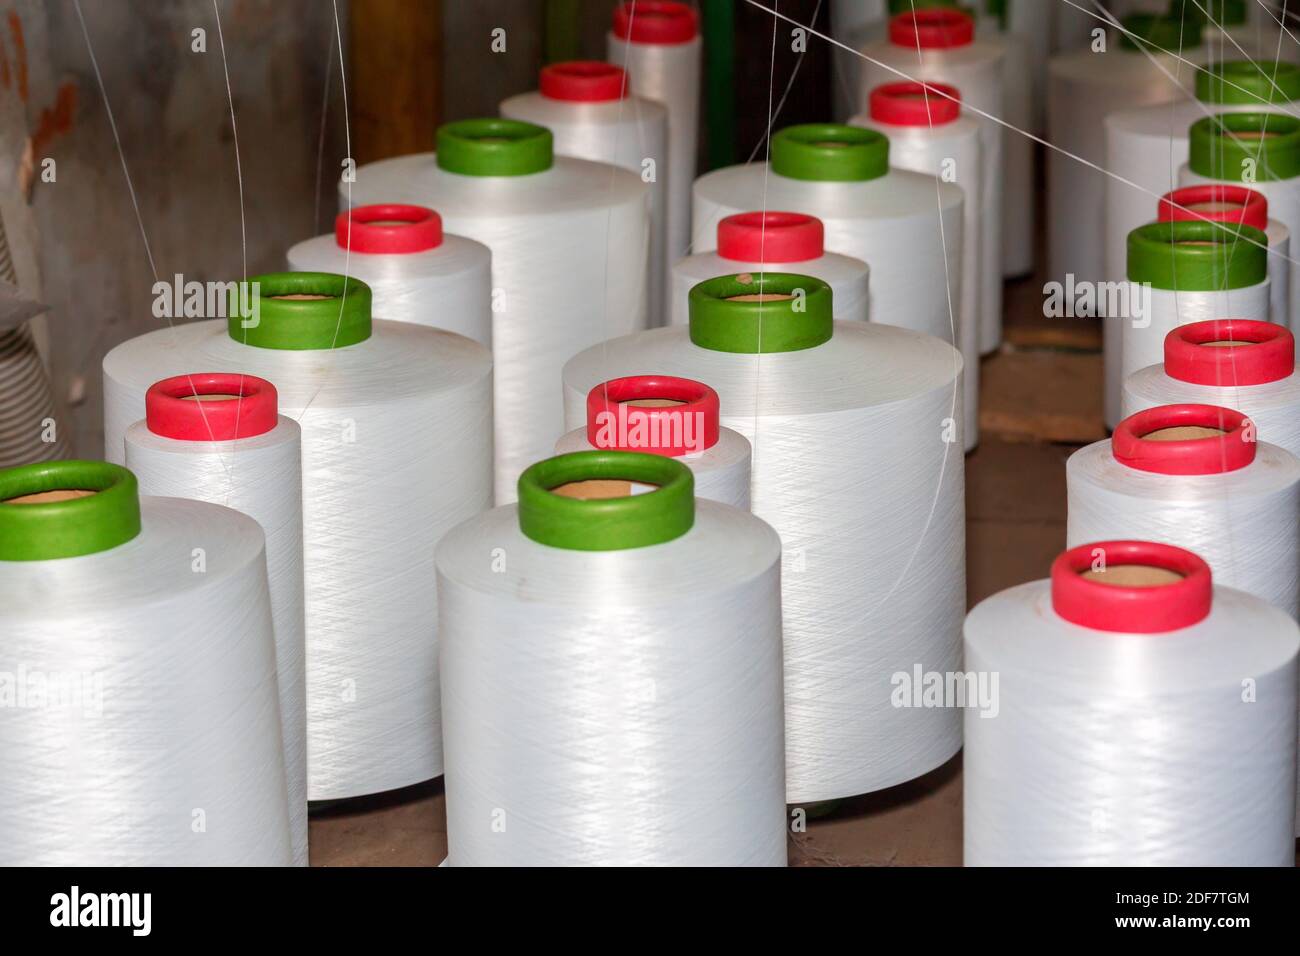 Red-green spools of white yarn in a garment factory. Weaving loom in a textile factory. Stock Photo